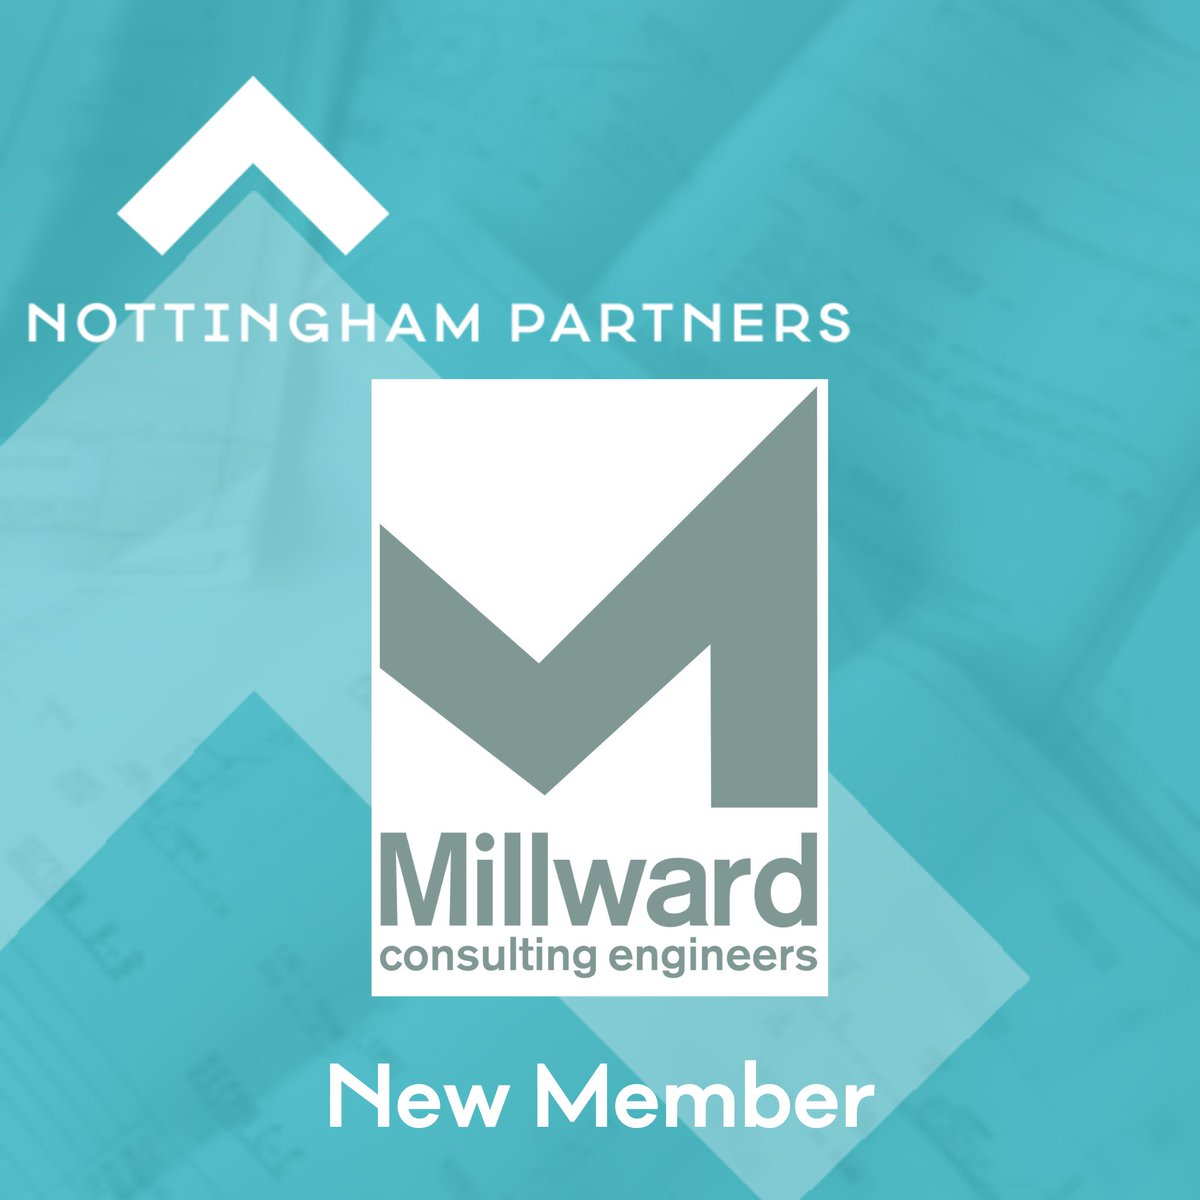 Welcome to our new member @MillwardIEC An engineering firm that goes beyond conventional problem-solving. Millward specialises in Highways & Infrastructure, Civil & Structural Engineering, Environmental & Geotechnical, and Traffic & Transport services ow.ly/aiPP50QFhz9